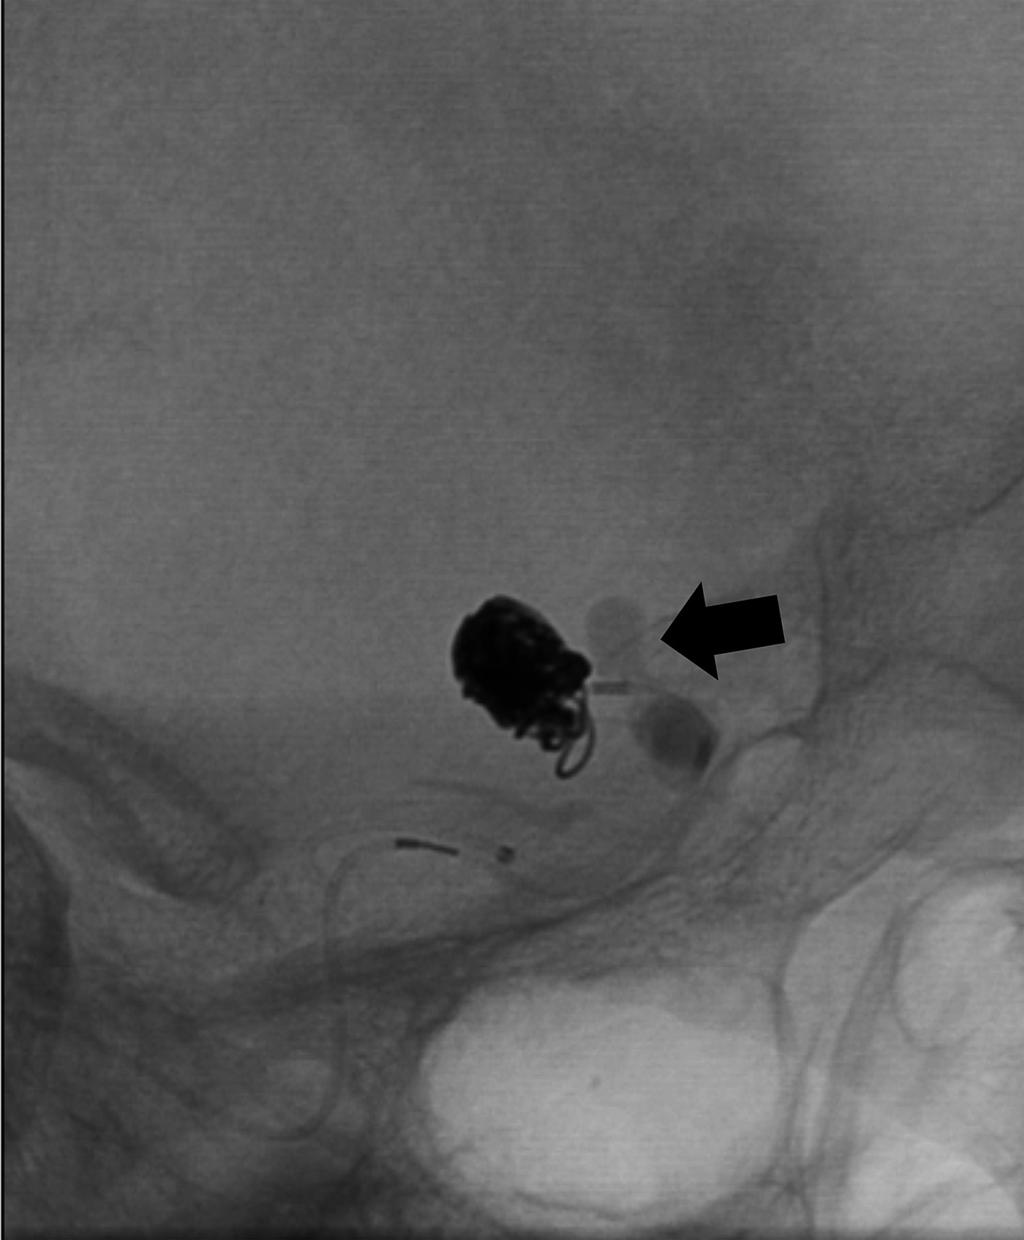 during embolization of unruptured IC-PC aneurysm in a 73-year-old